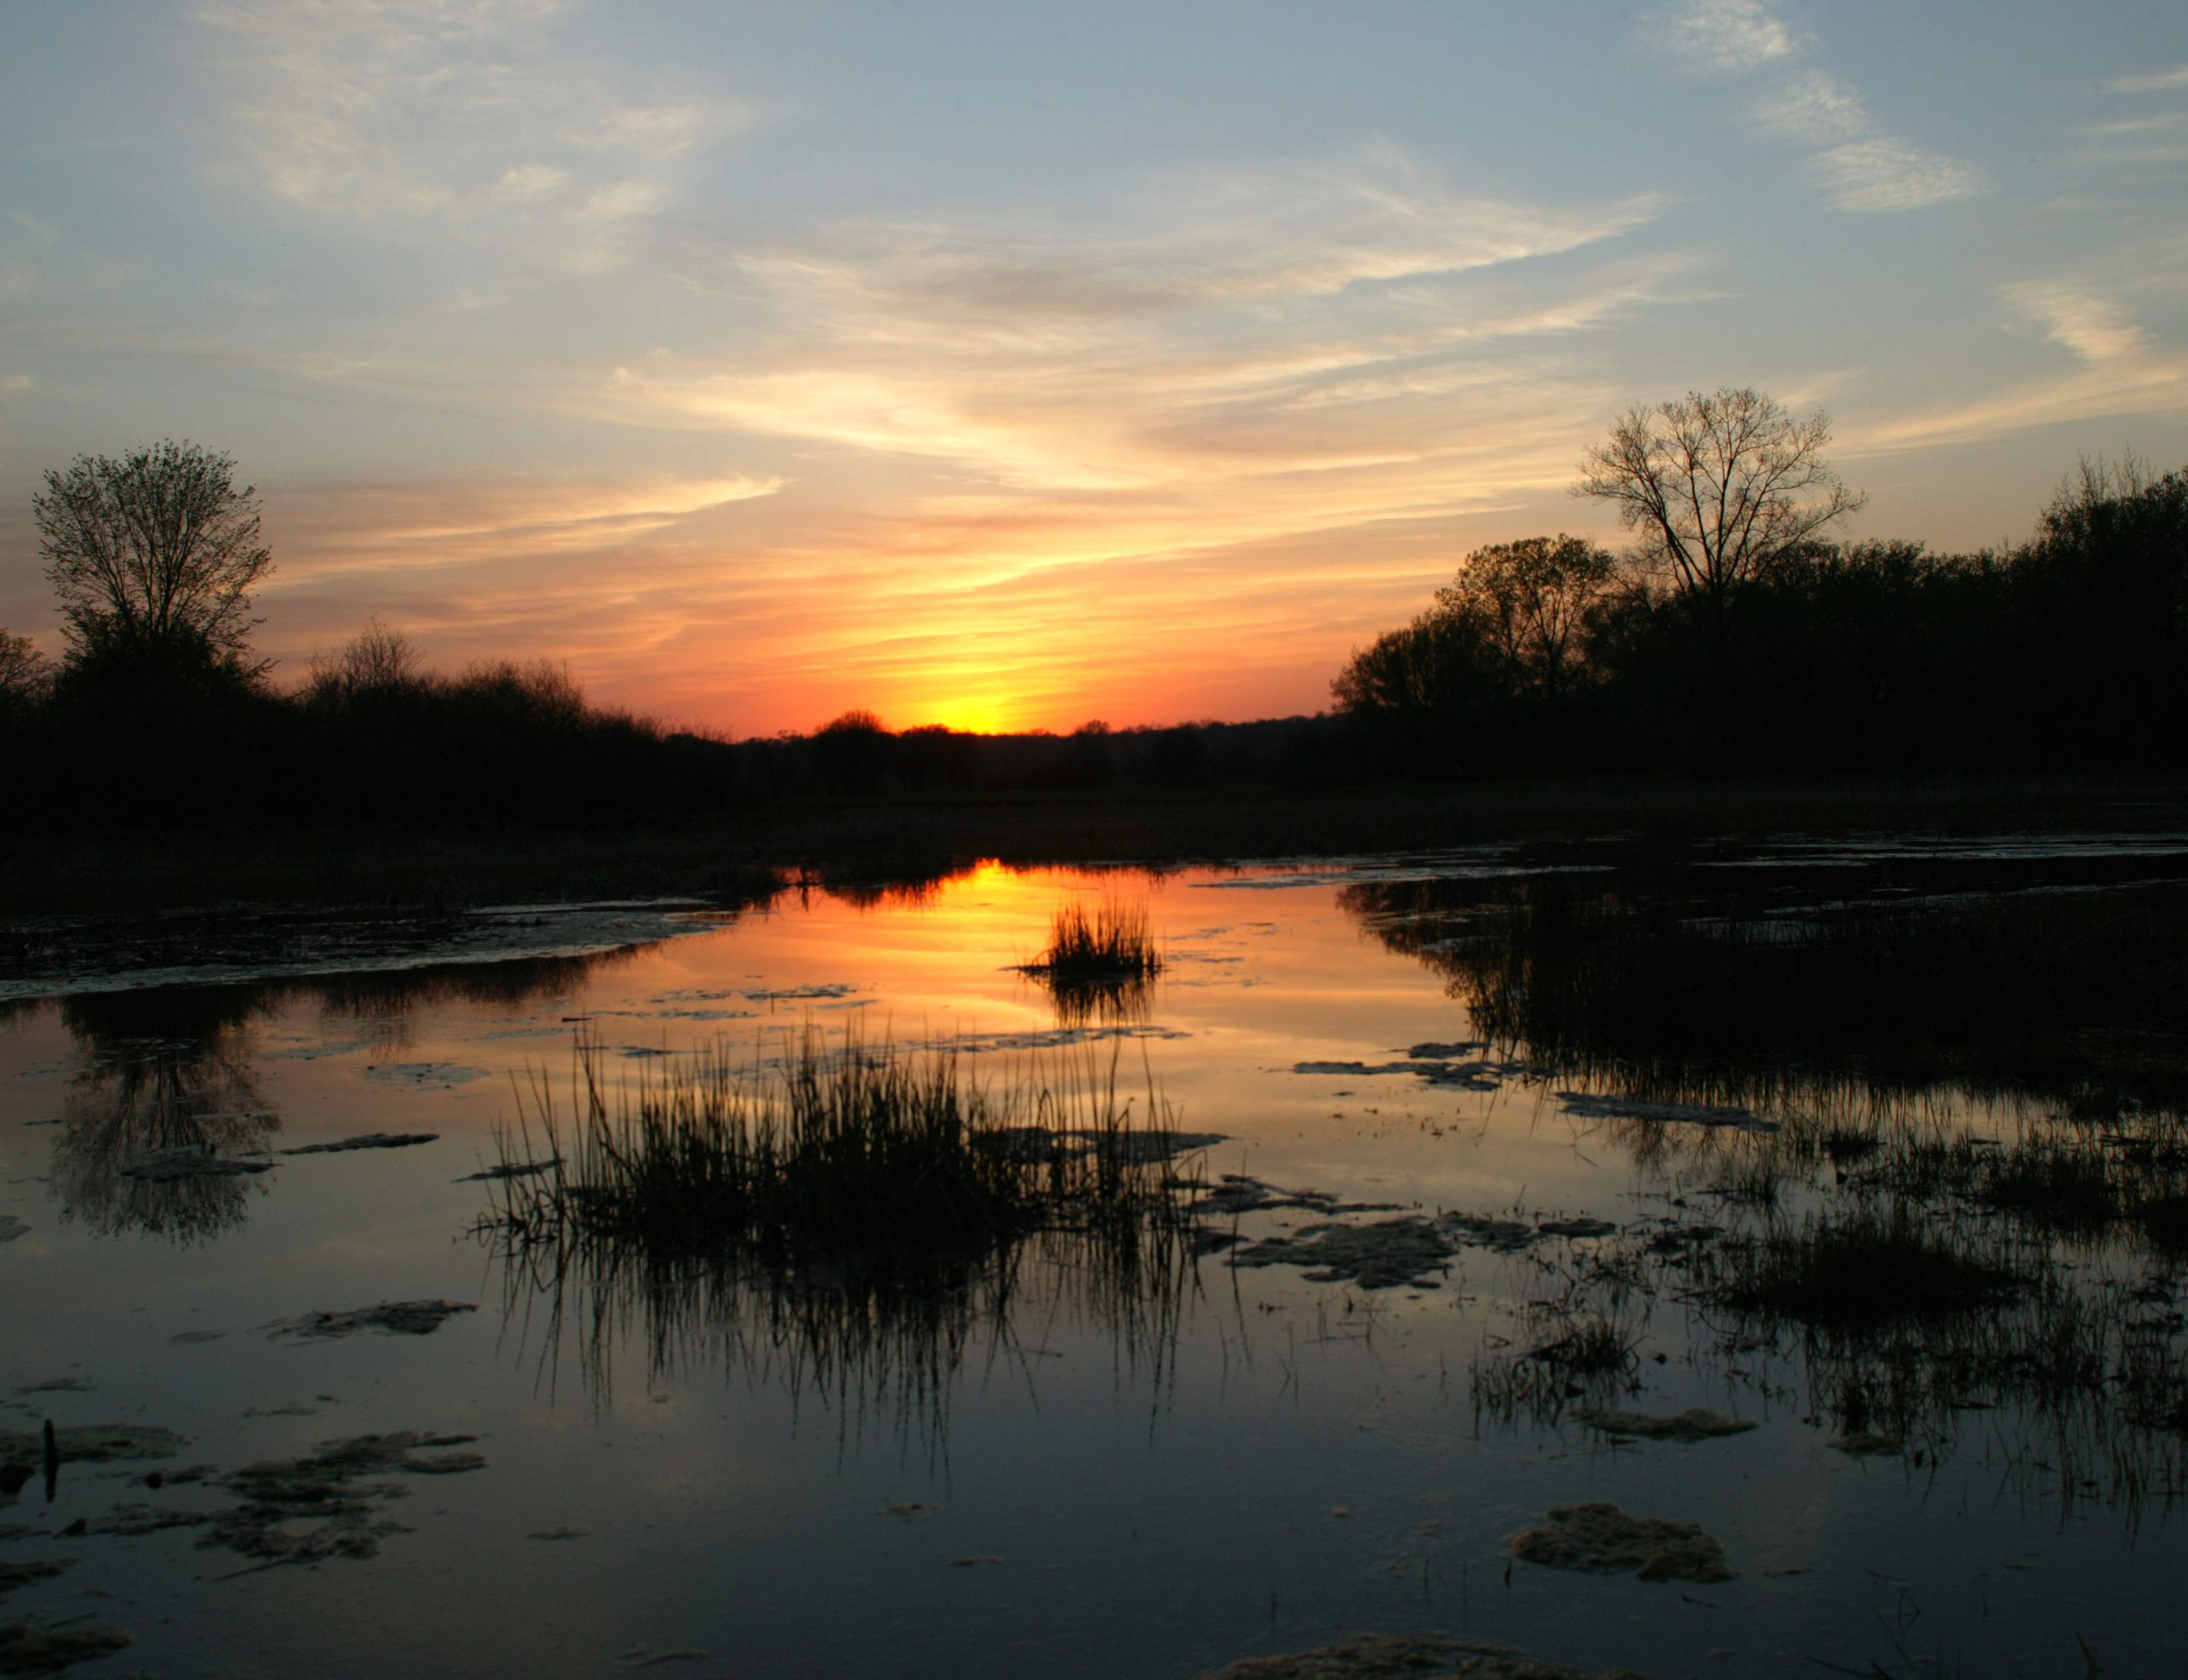 Sunset over the water at Chain O Lakes State Park in the Fox River Valley